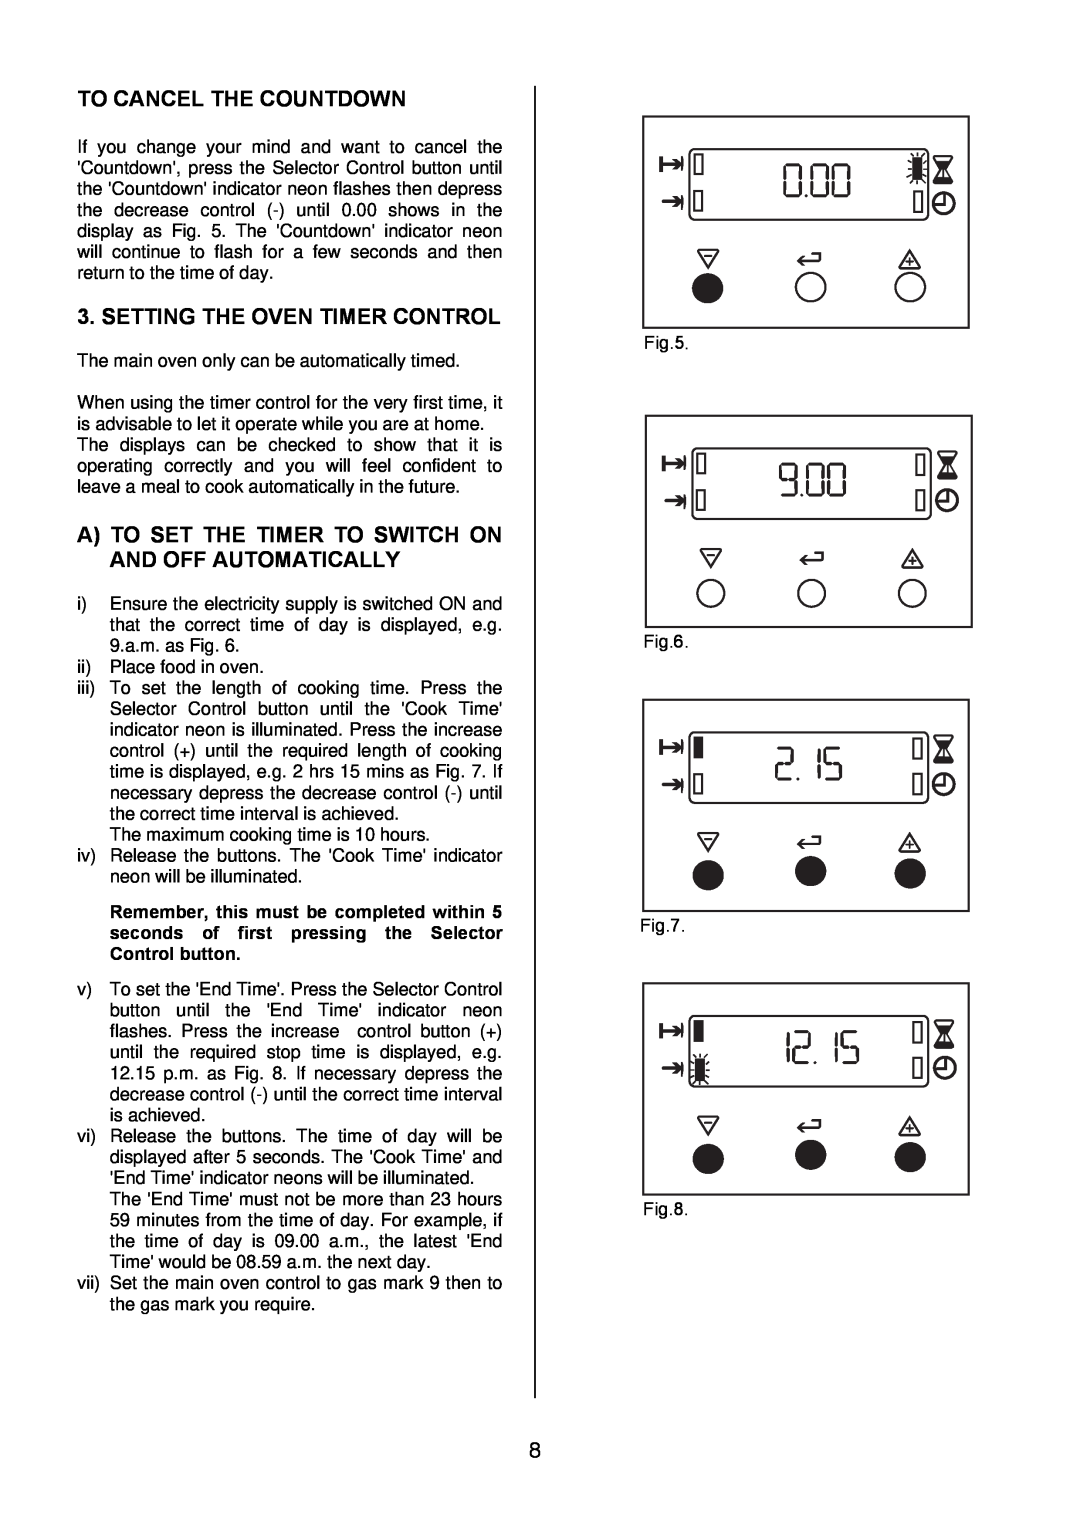 Electrolux EIKG6047, EIKG6046 user manual To Cancel The Countdown, Setting The Oven Timer Control 